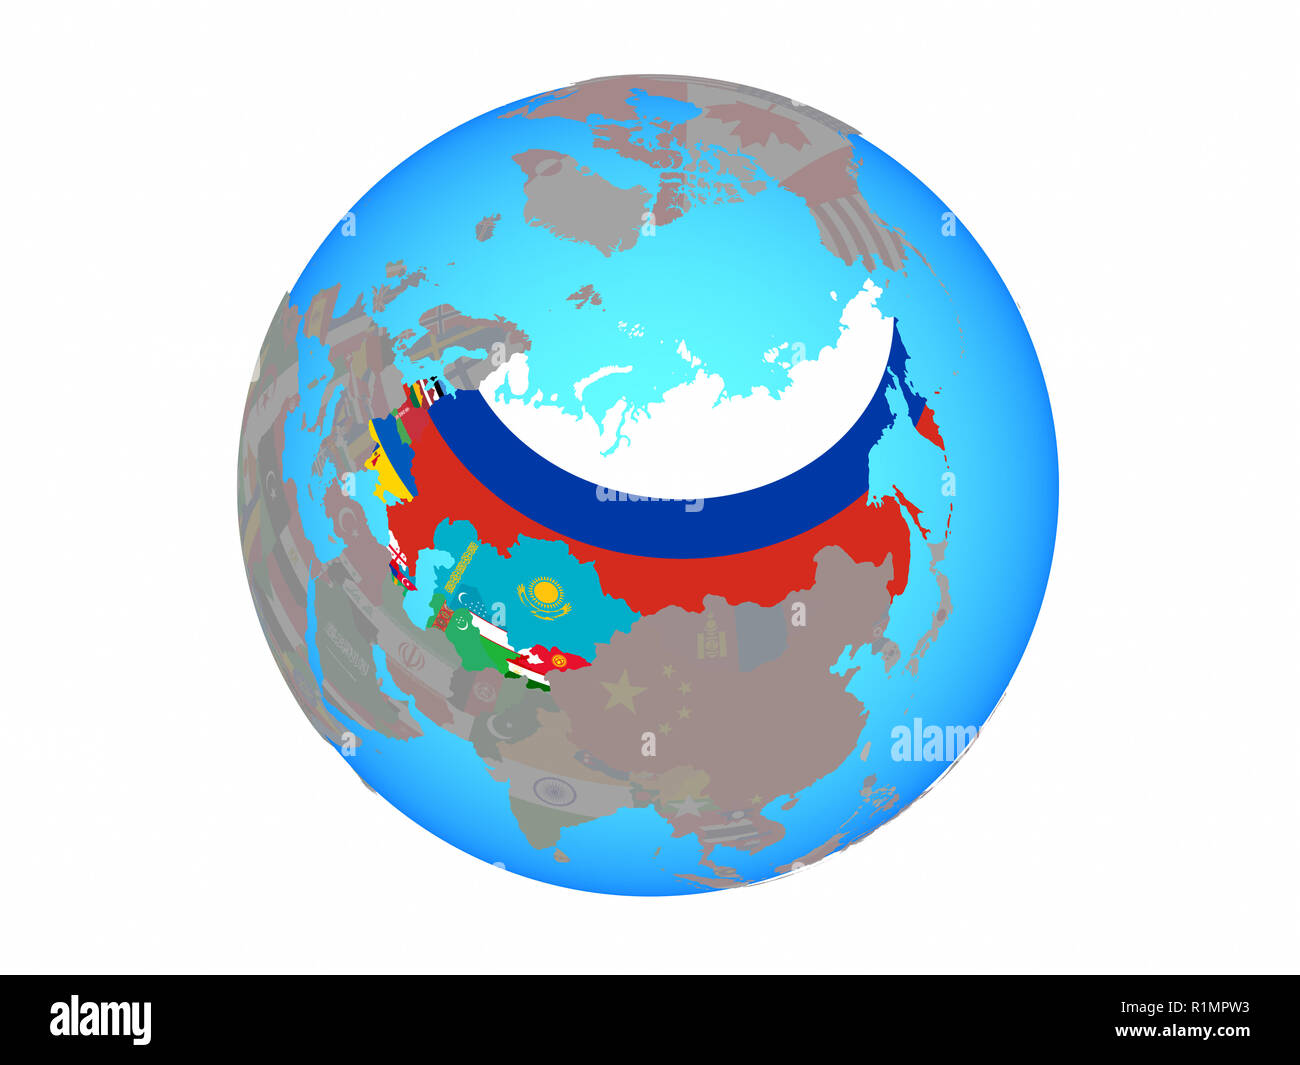 Former Soviet Union with national flags on blue political globe. 3D illustration isolated on white background. Stock Photo